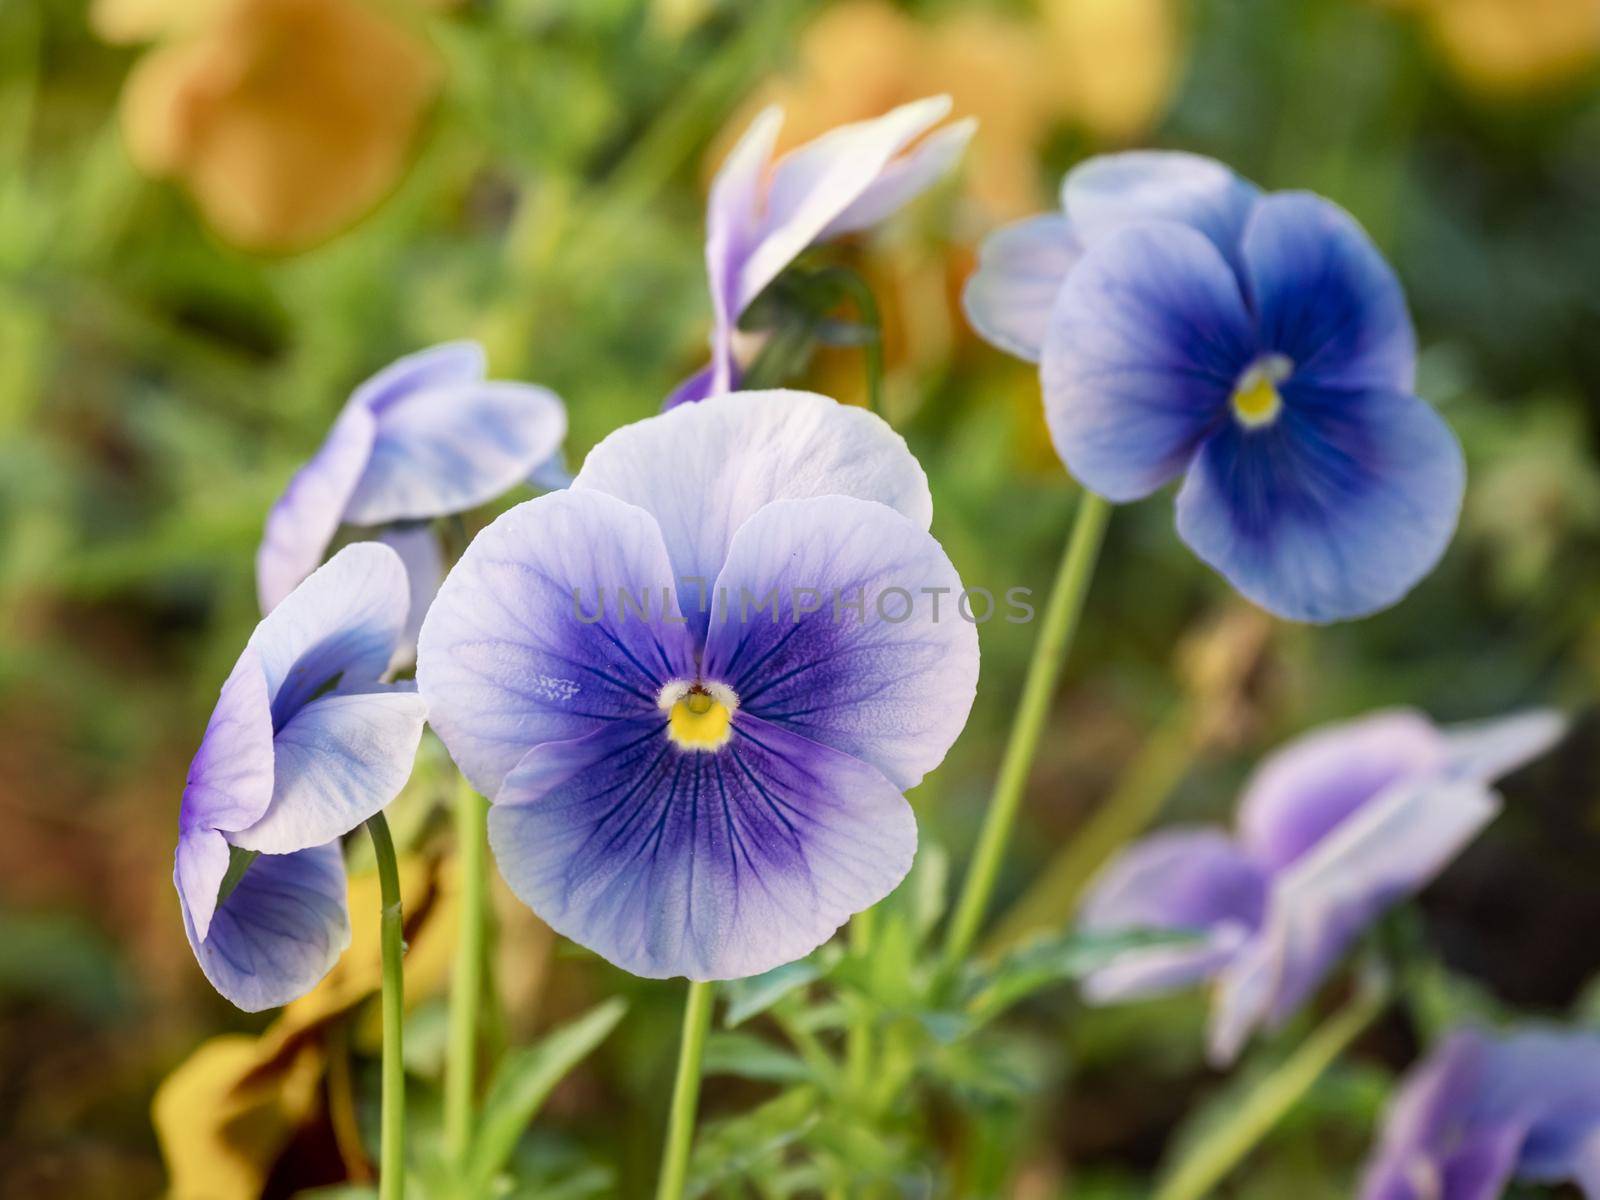 Blooming Viola tricolor, also known as wild pansy, Johnny Jump up, heartsease, heart's delight, tickle-my-fancy, Jack-jump-up-and-kiss-me, come-and-cuddle-me, three faces in a hood, love-in-idleness, and pink of my john.